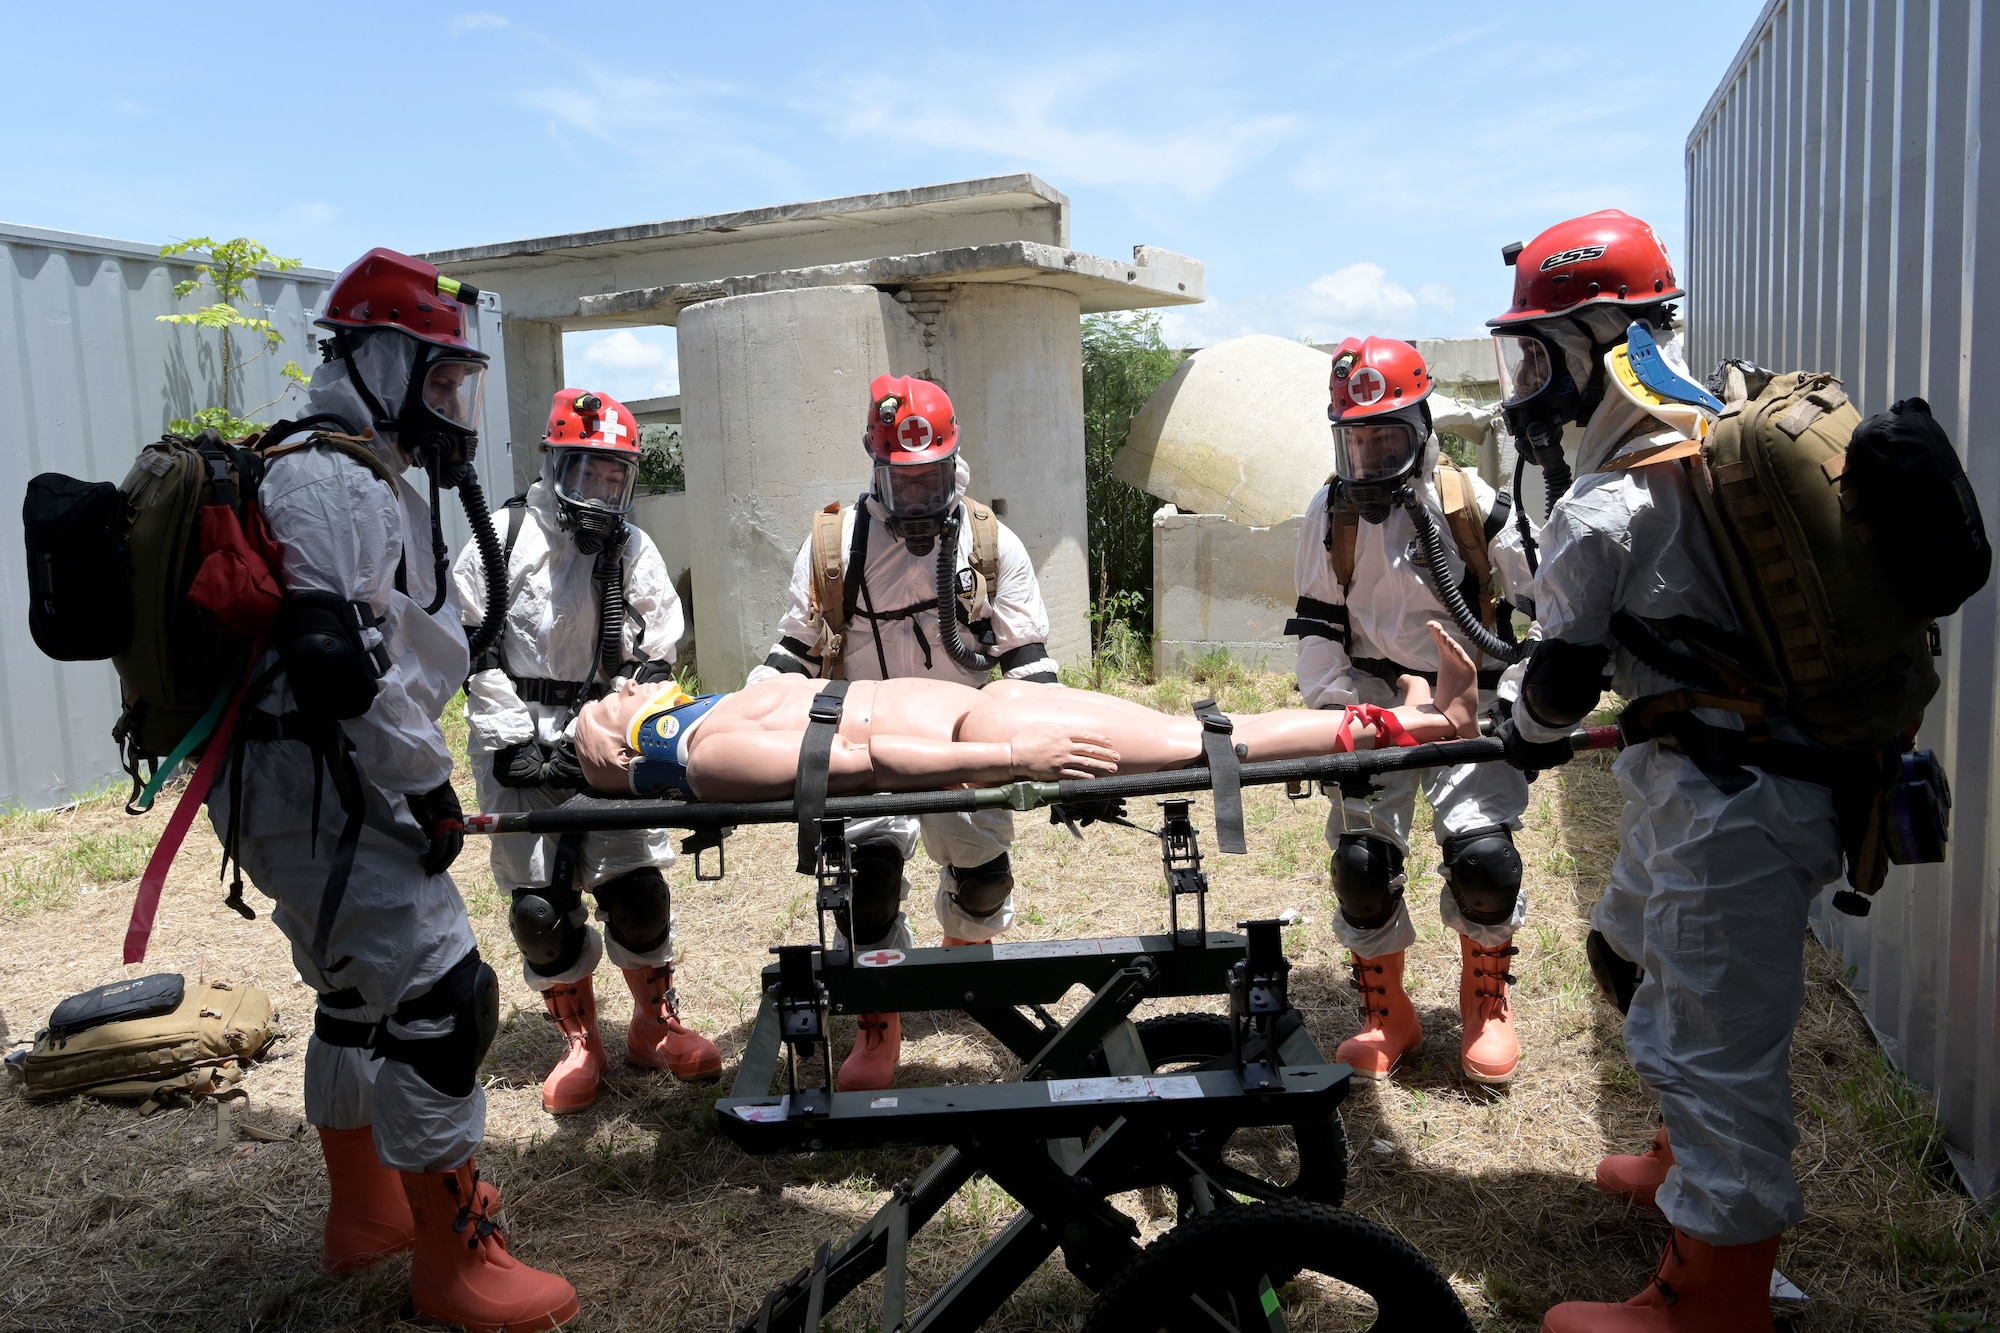 U.S. Airmen with the 156th Medical Group Detachment 1, Chemical, Biological, Radiological, Nuclear and high-yield Explosive Enhanced Response Force Package, assess, stabilize and prepare to transport a simulated victim during a search and extraction training exercise at Camp Santiago Joint Training Center, Salinas, Puerto Rico, Aug. 19, 2021.